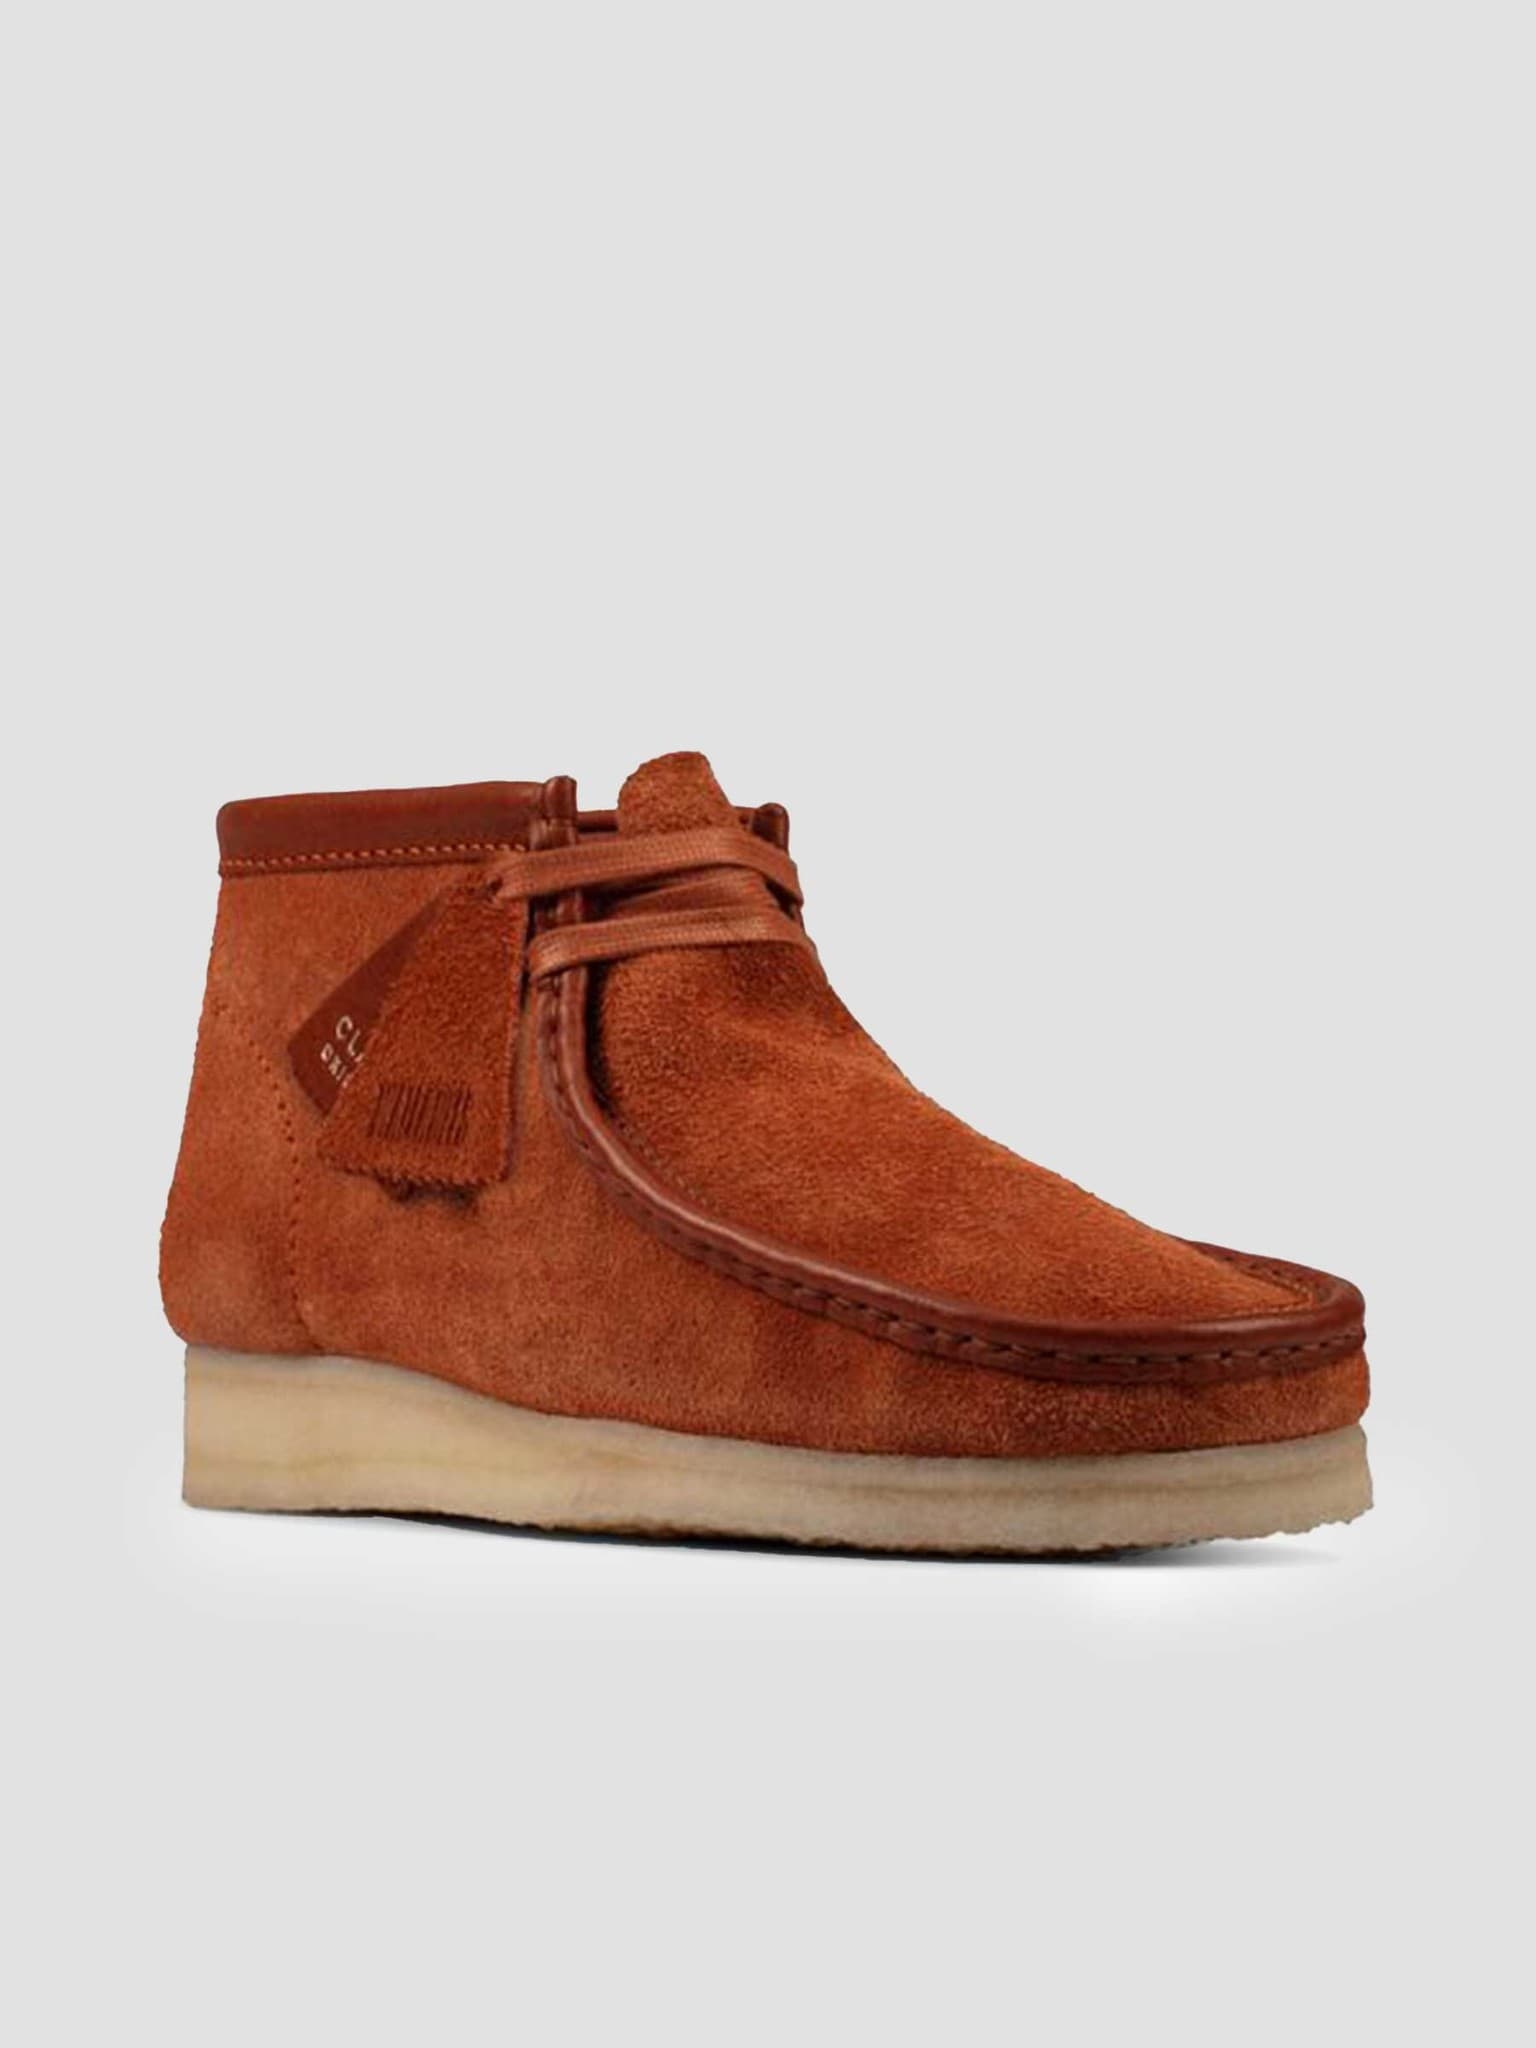 Wallabee Boot Tan Hairy Suede